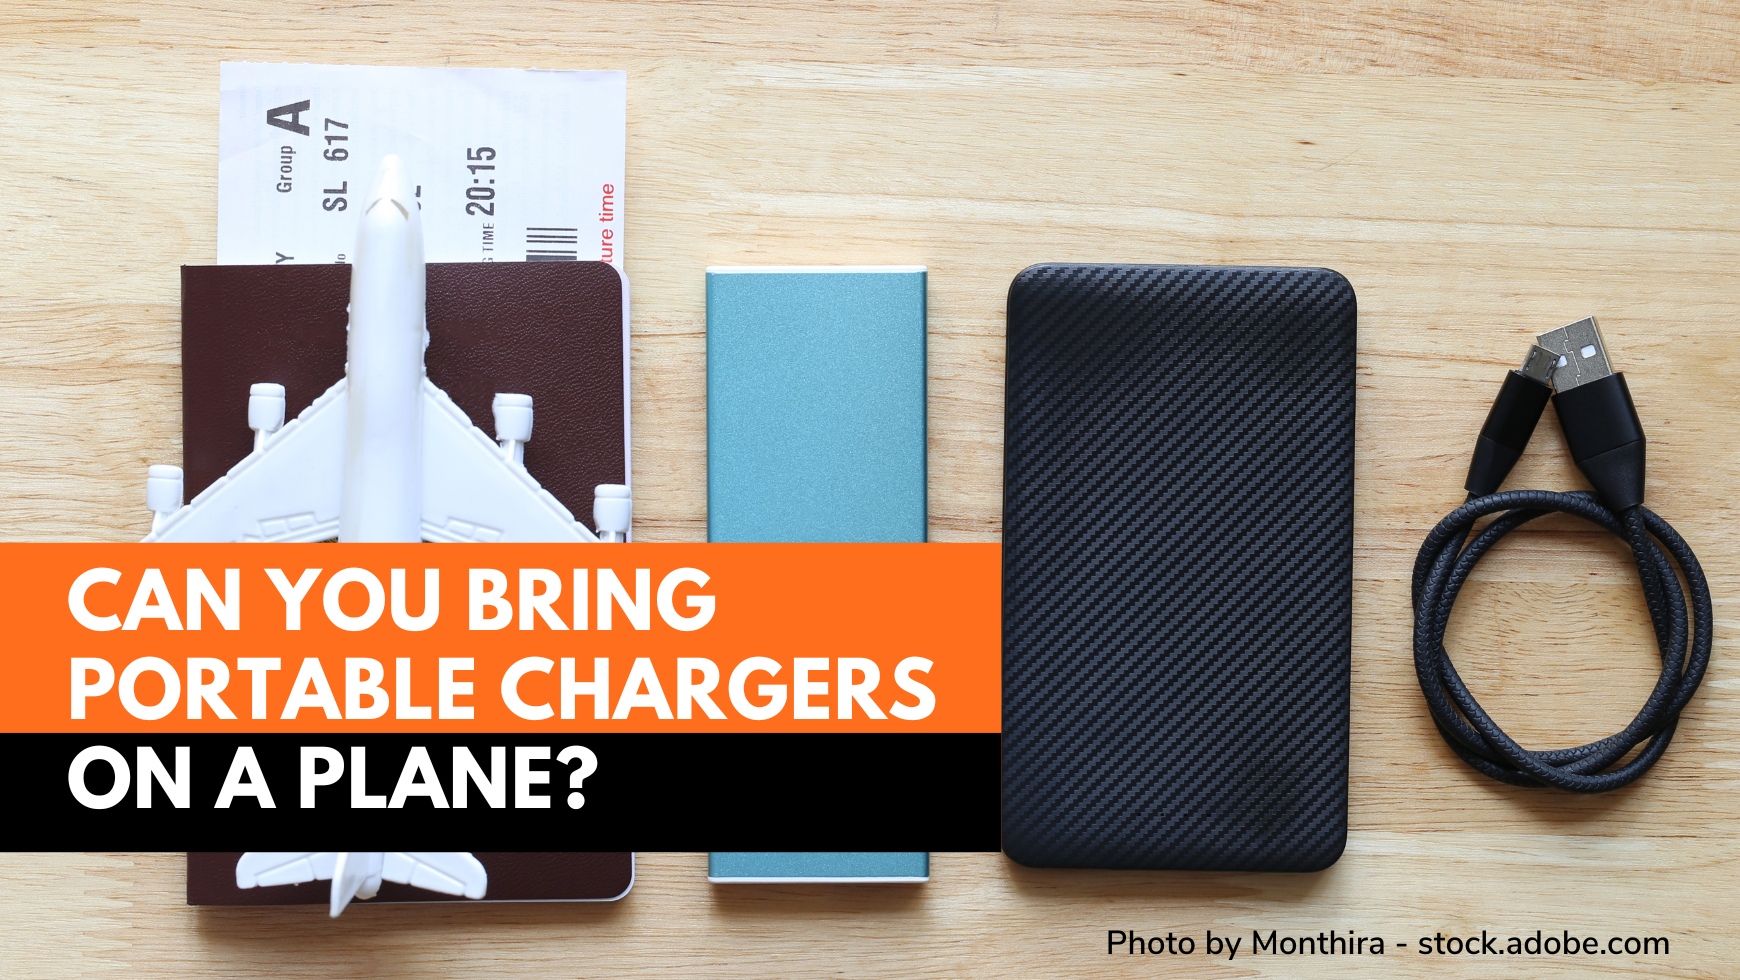 Can You Bring Portable Chargers On A Plane - All You Need To Know